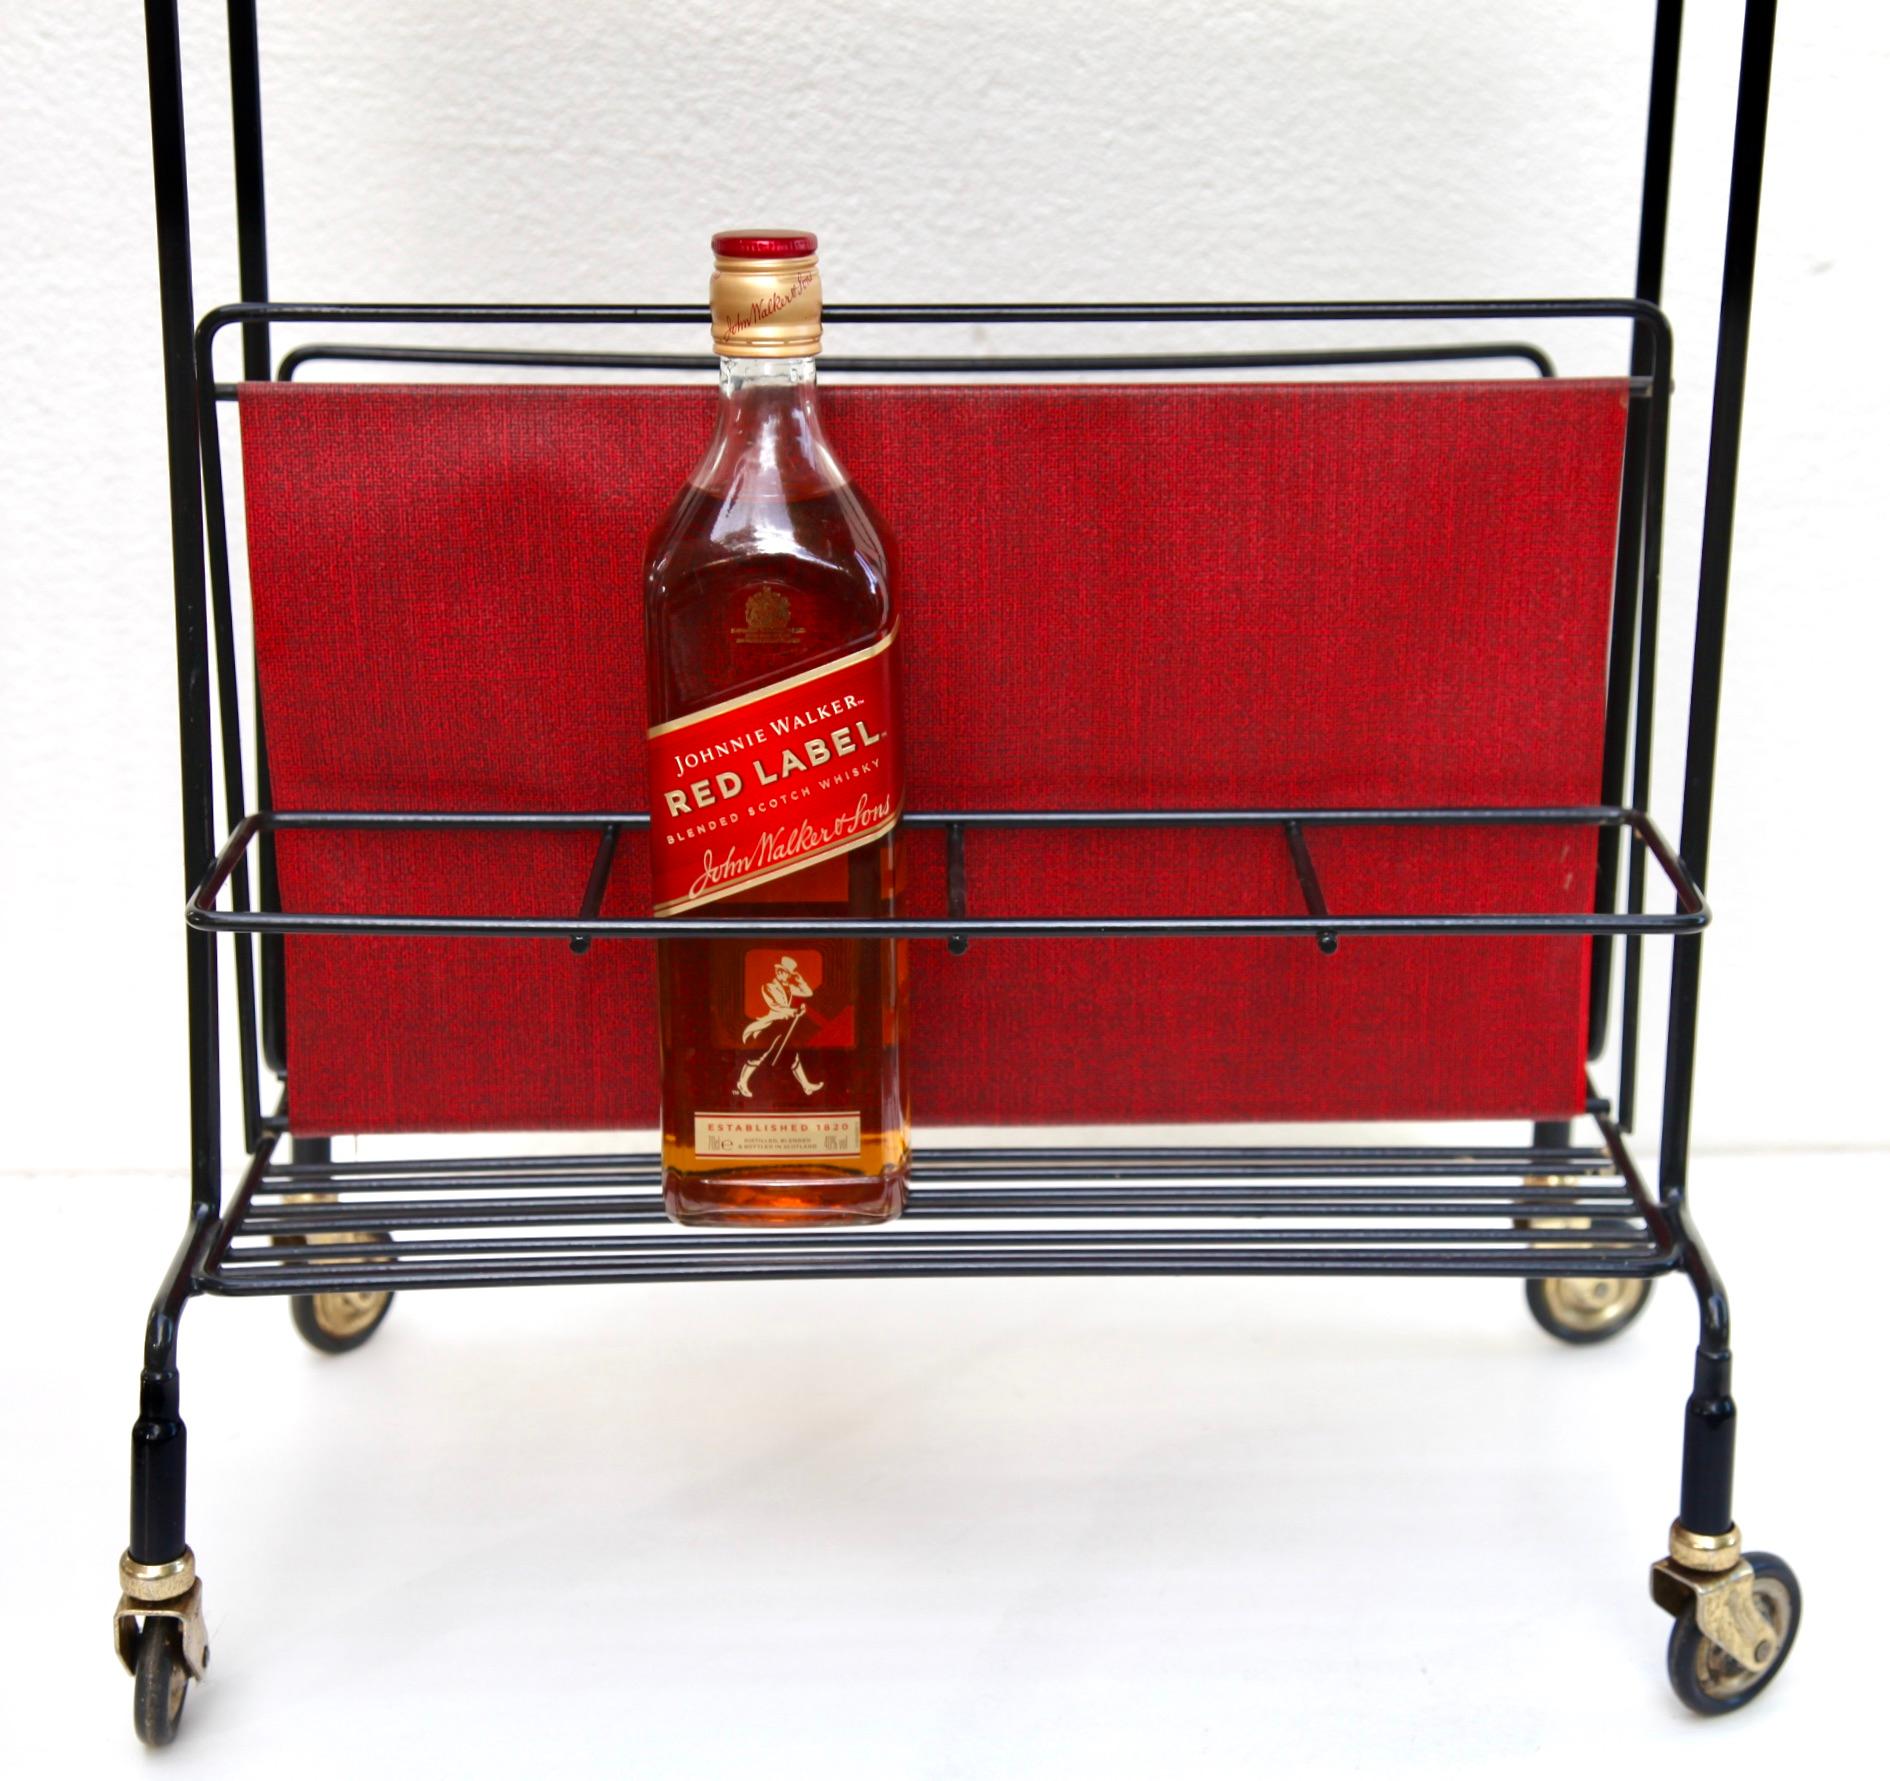 Hand-Crafted Bar Cart / Magazine Holder by Paul Nagel for JIE Gantofta, Germany, 1960s For Sale